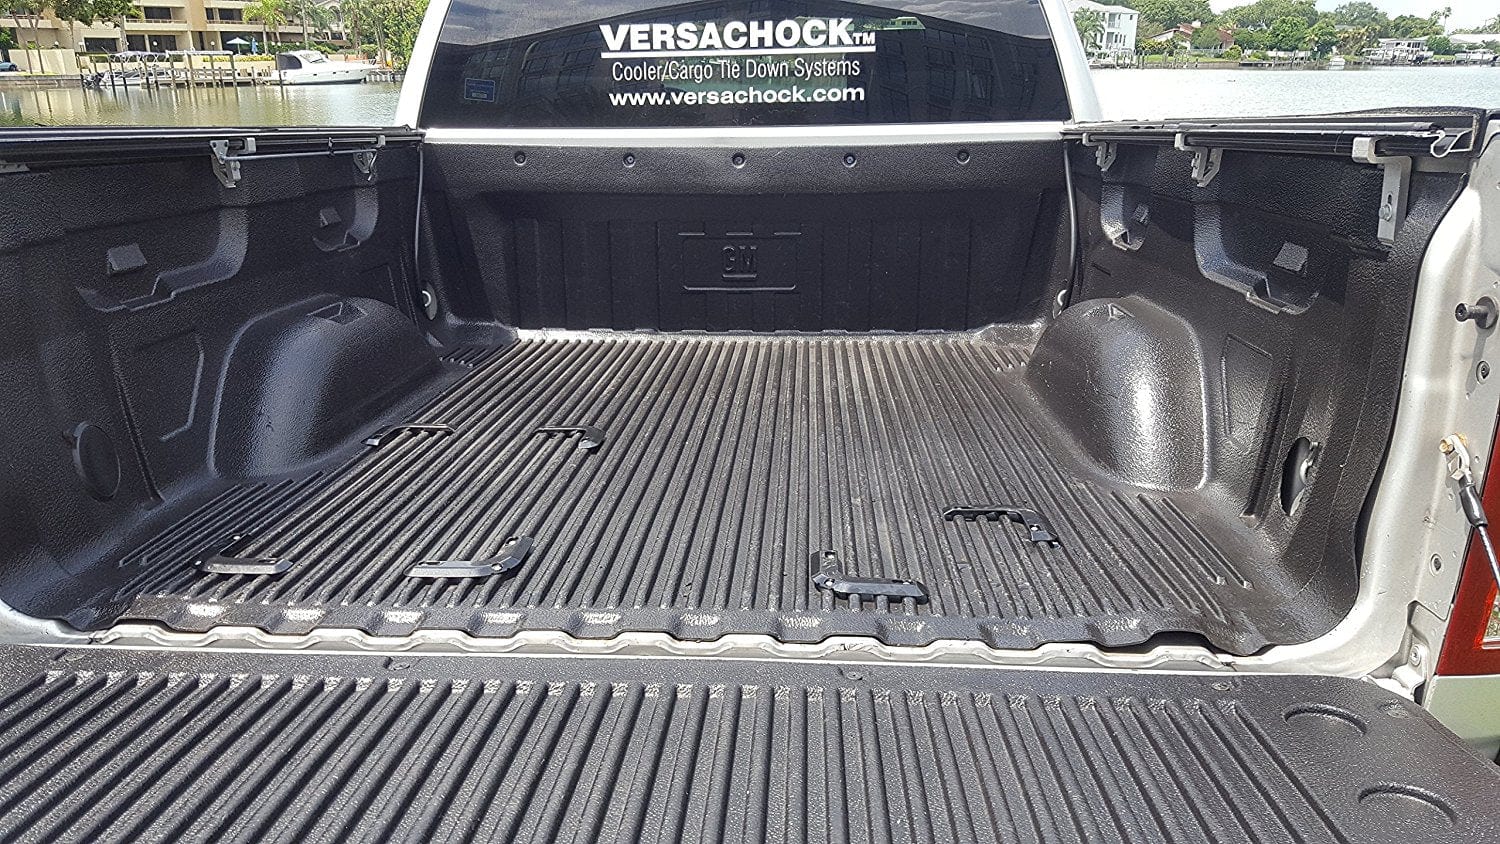 VersaChock 744368381622 Boat And Truck Removable Cargo Tie Downs 4pk, Black